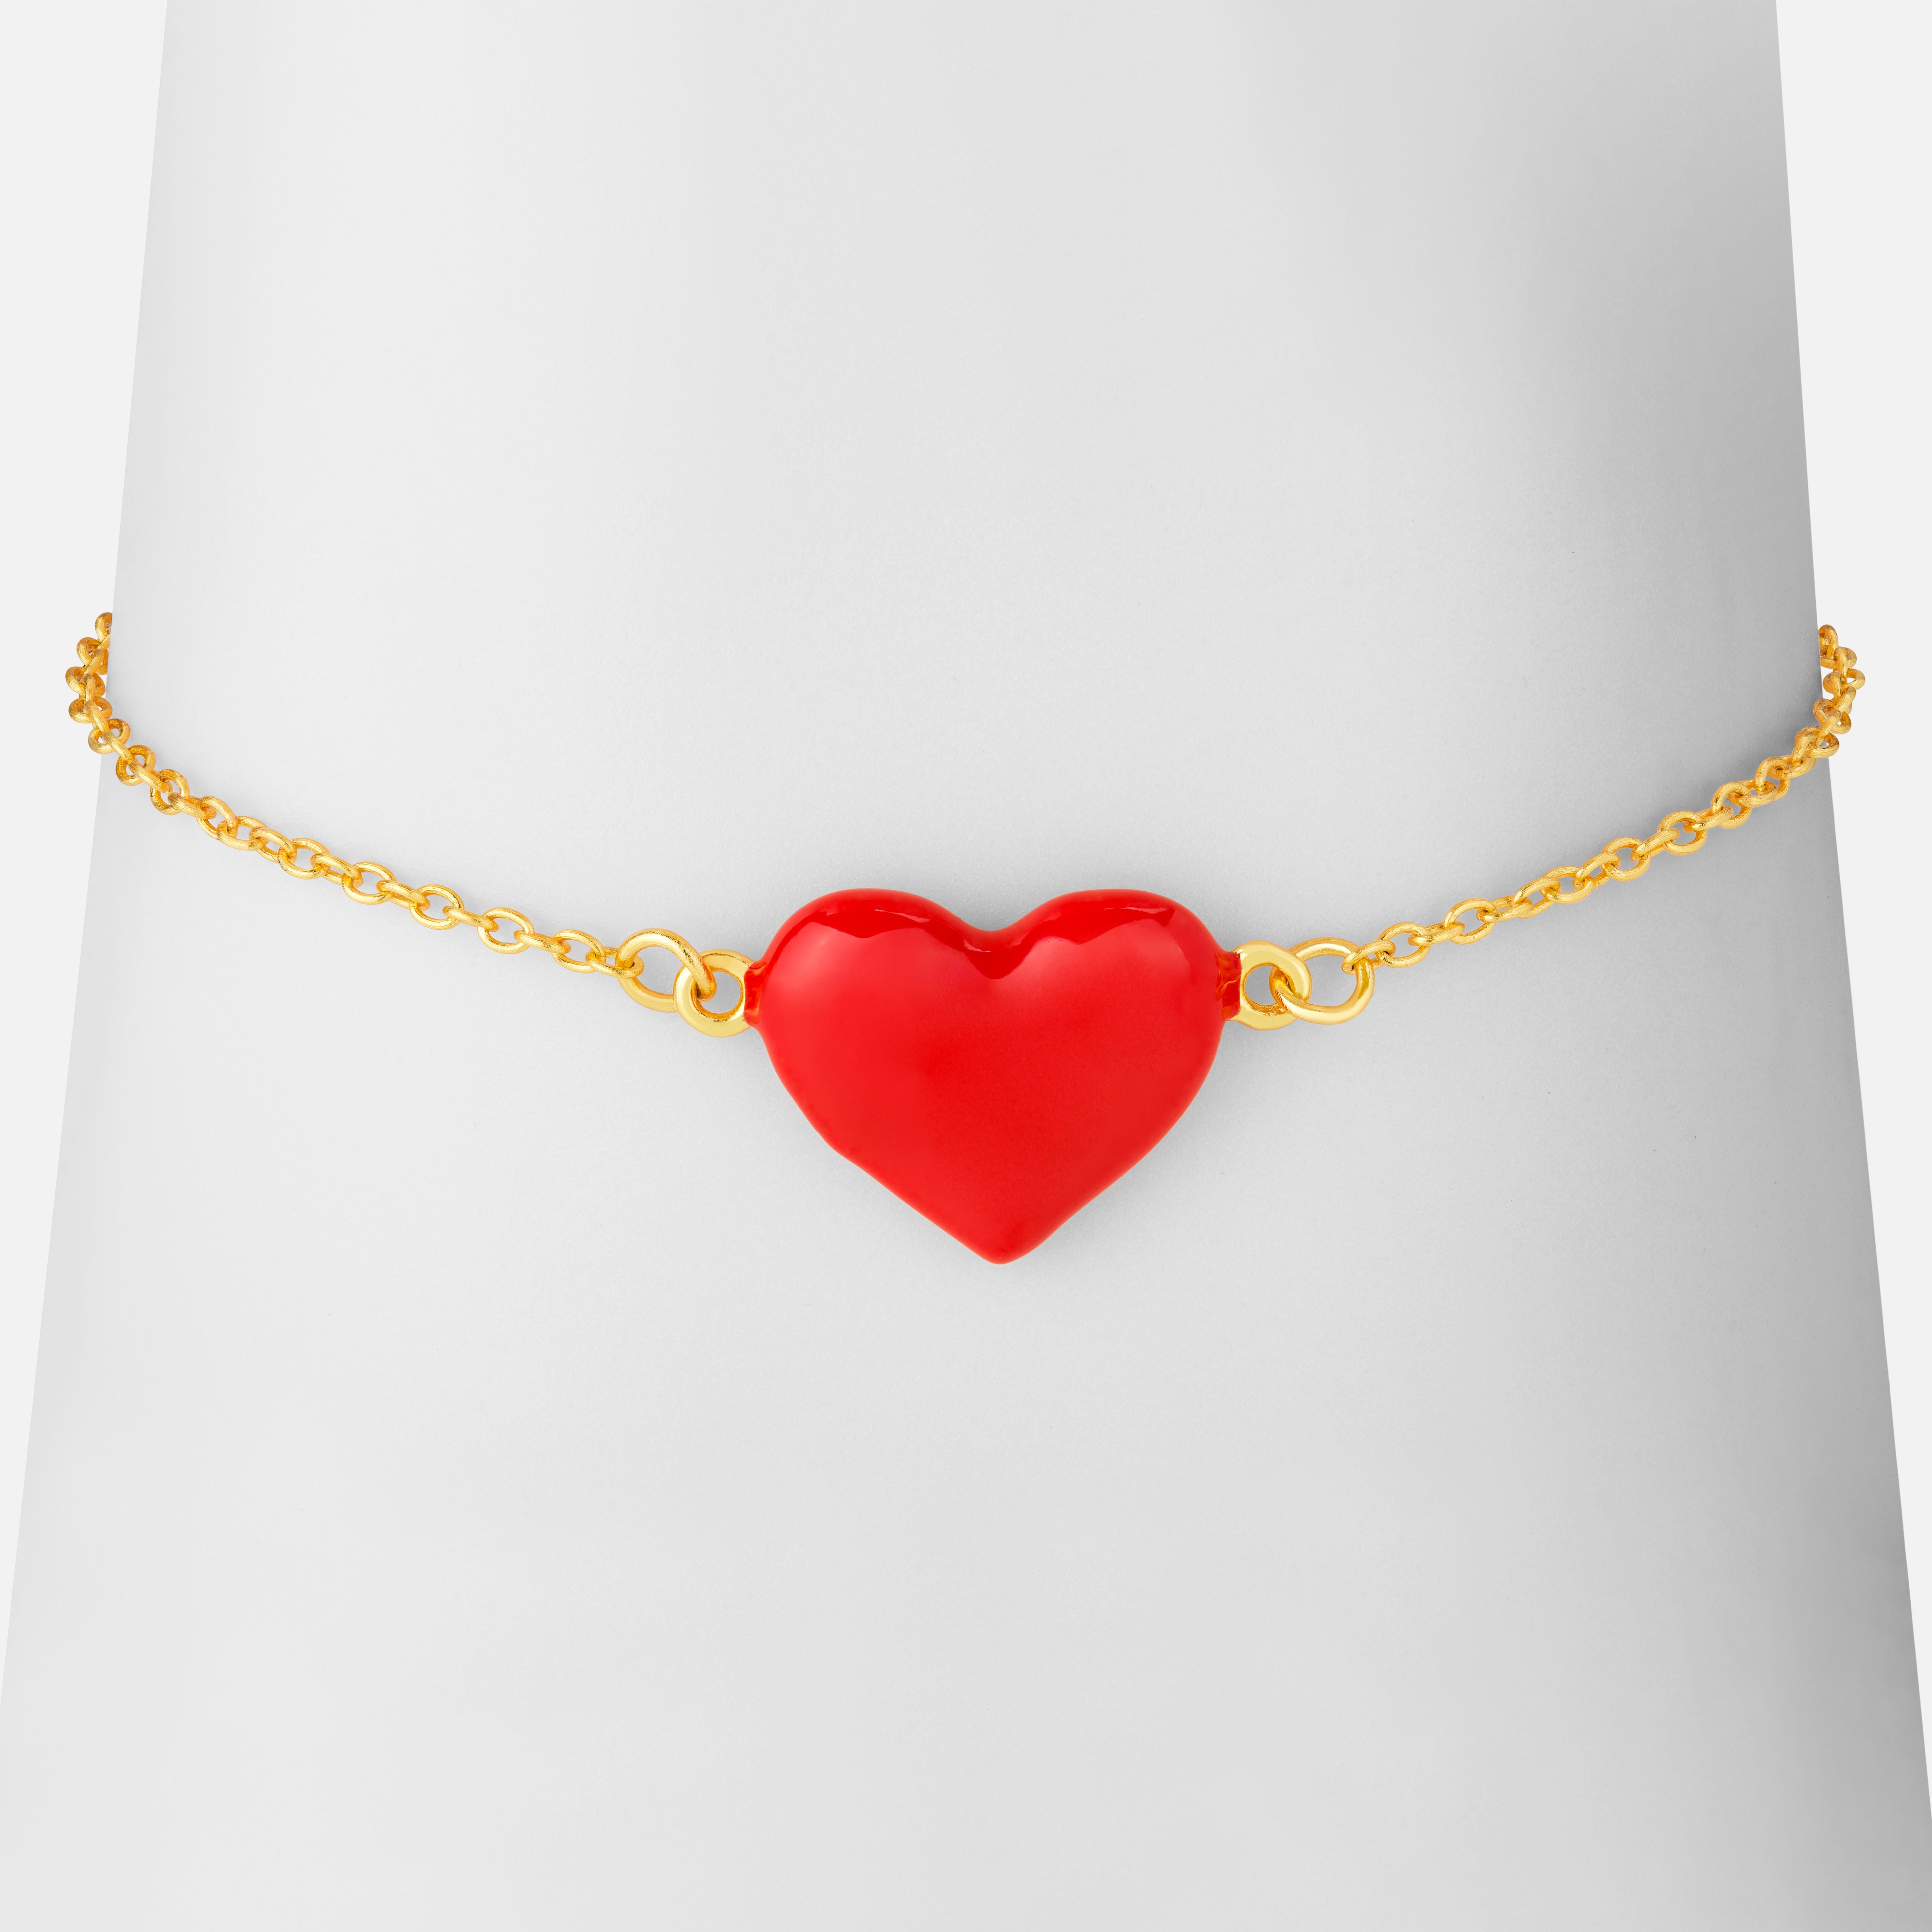 This is a wonderful gift for your beloved and yourself. 

A classic, if not THE classic of all motifs, reinterpreted in a fresh and vibrant way.

The meticulously crafted silver bracelet is 18K gold-plated. The enamel heart is crafted in 3D, giving